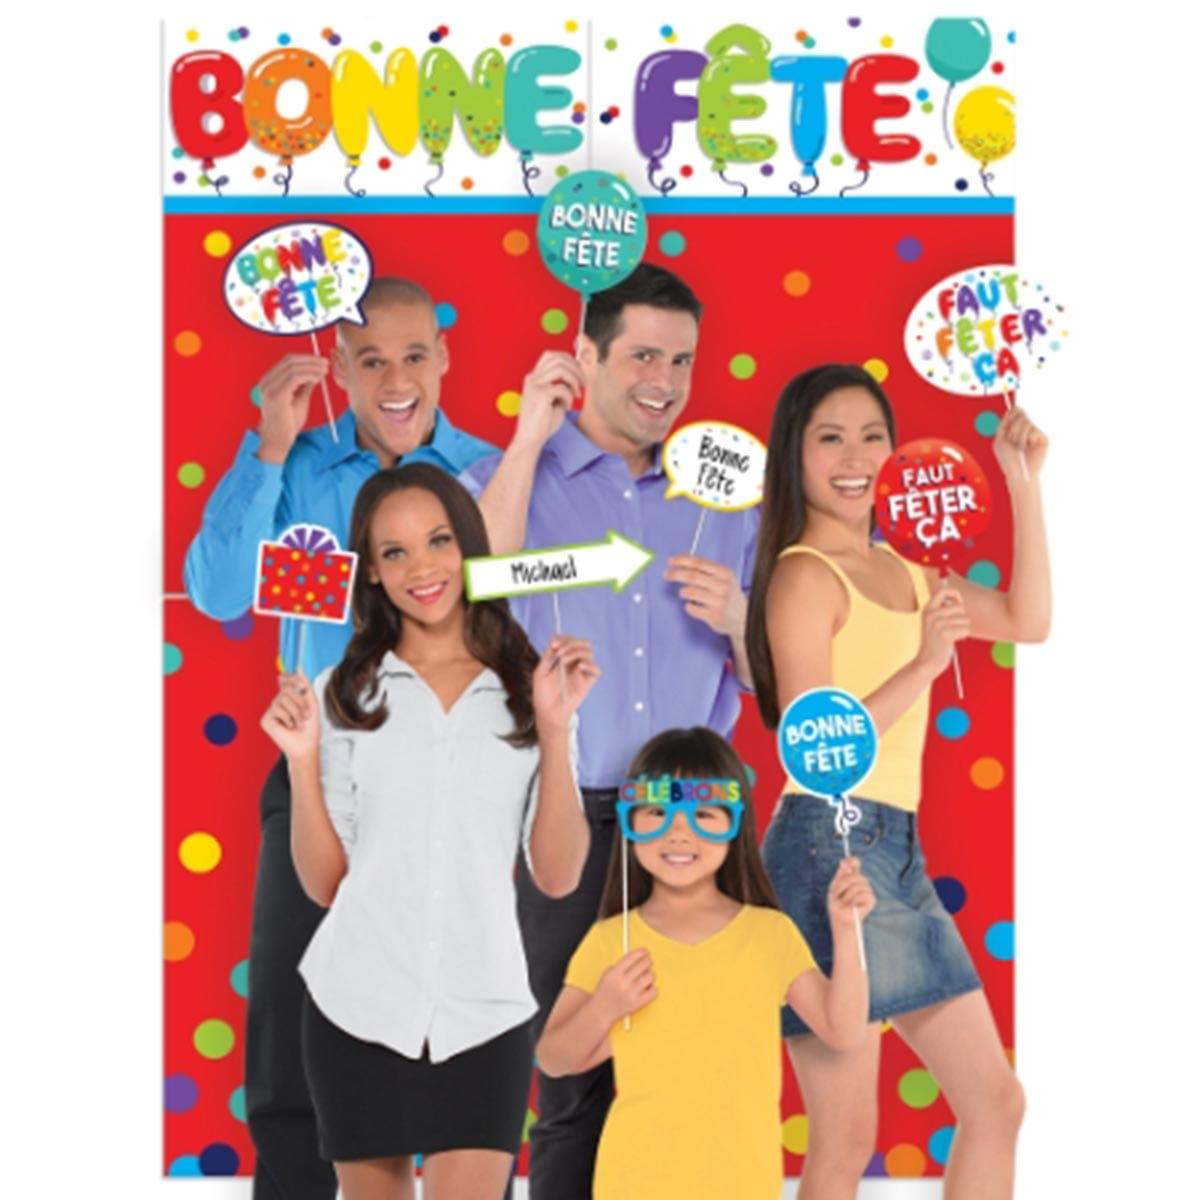 Buy General Birthday Bonne Fête Balloons - Scene Setter With Props sold at Party Expert